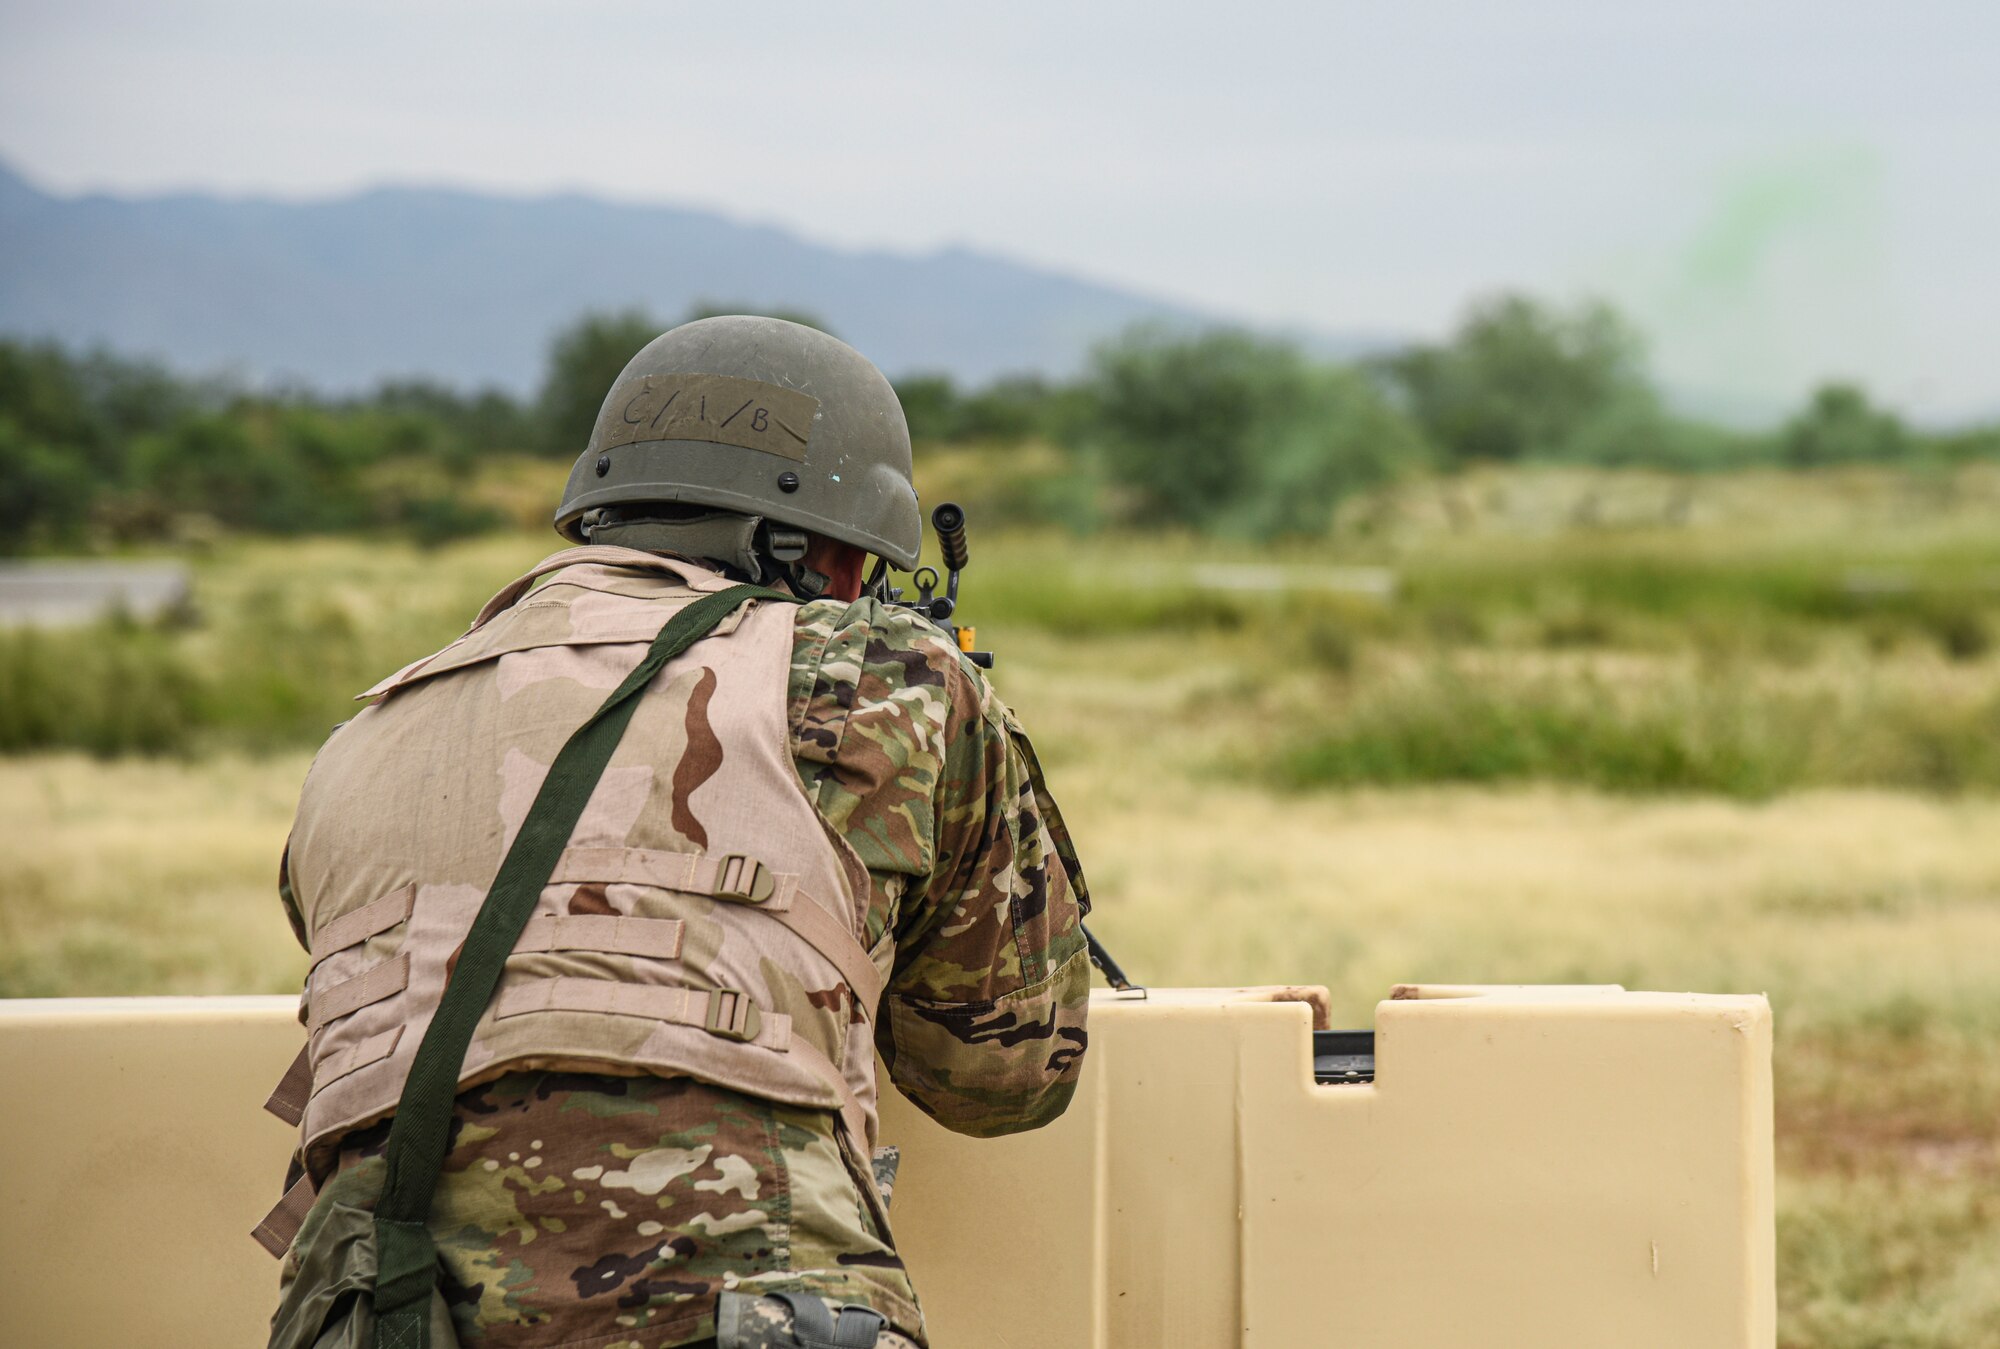 Pictured above is an Airmen standing behind a barricade aiming his gun over the barricade.